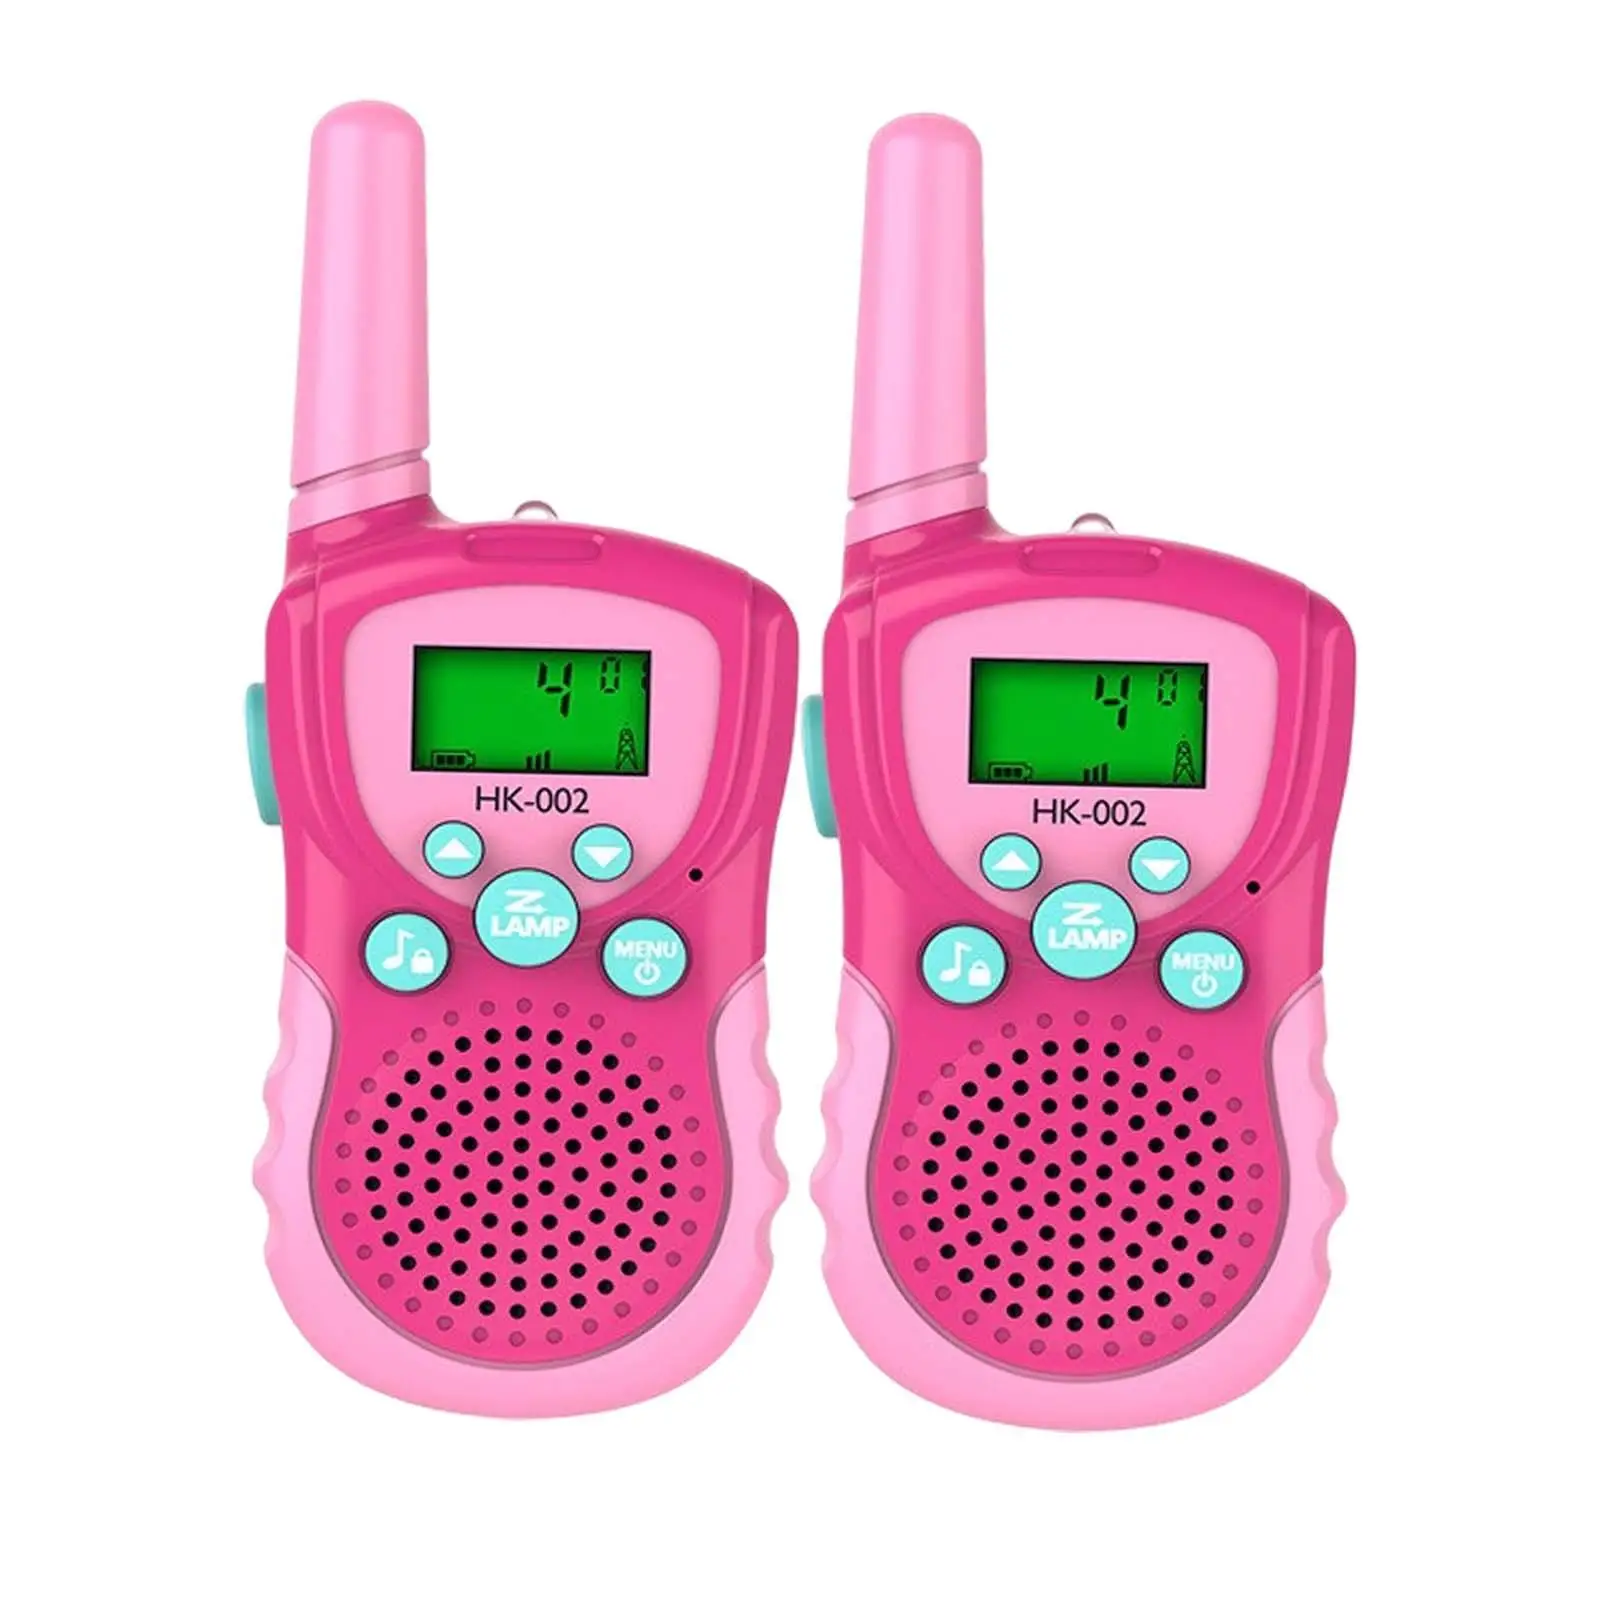 2x Walkie Talkies for Kids Outdoor Toy for 3-12 Years Old Camping Outdoor